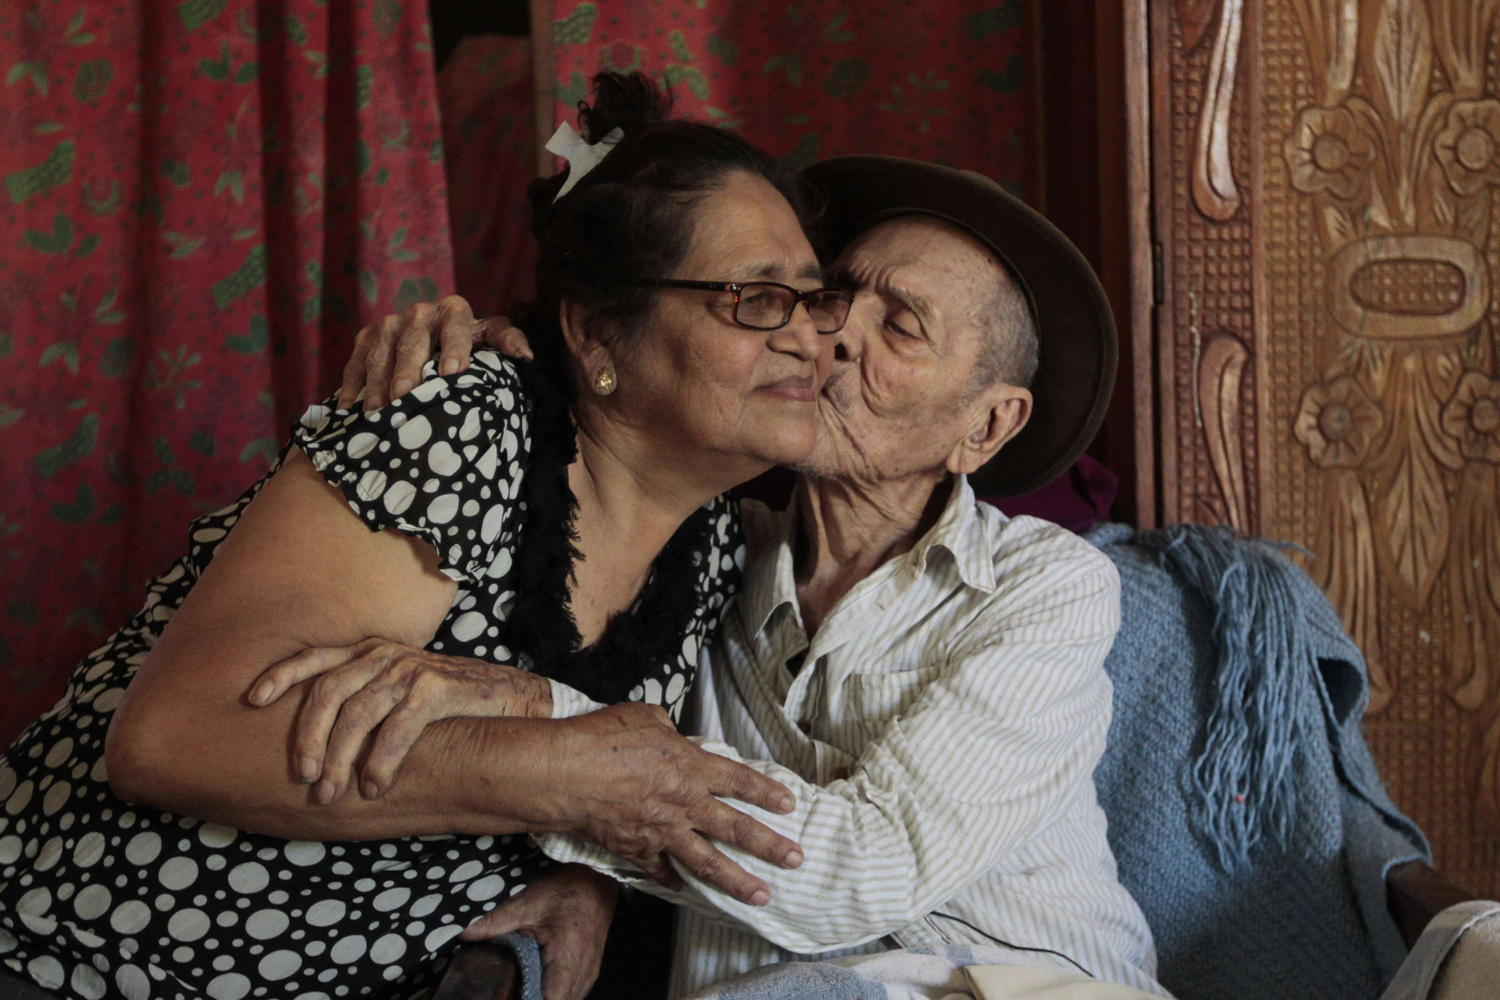 Hector Gaitan, 110, kisses his wife Nora Campo inside his home, at an abandoned station of the Nicaraguan Railway Company, the country's defunct railway, located on the outskirts of Managua April 8, 2014. Gaitan celebrated his 110th birthday just five days before.